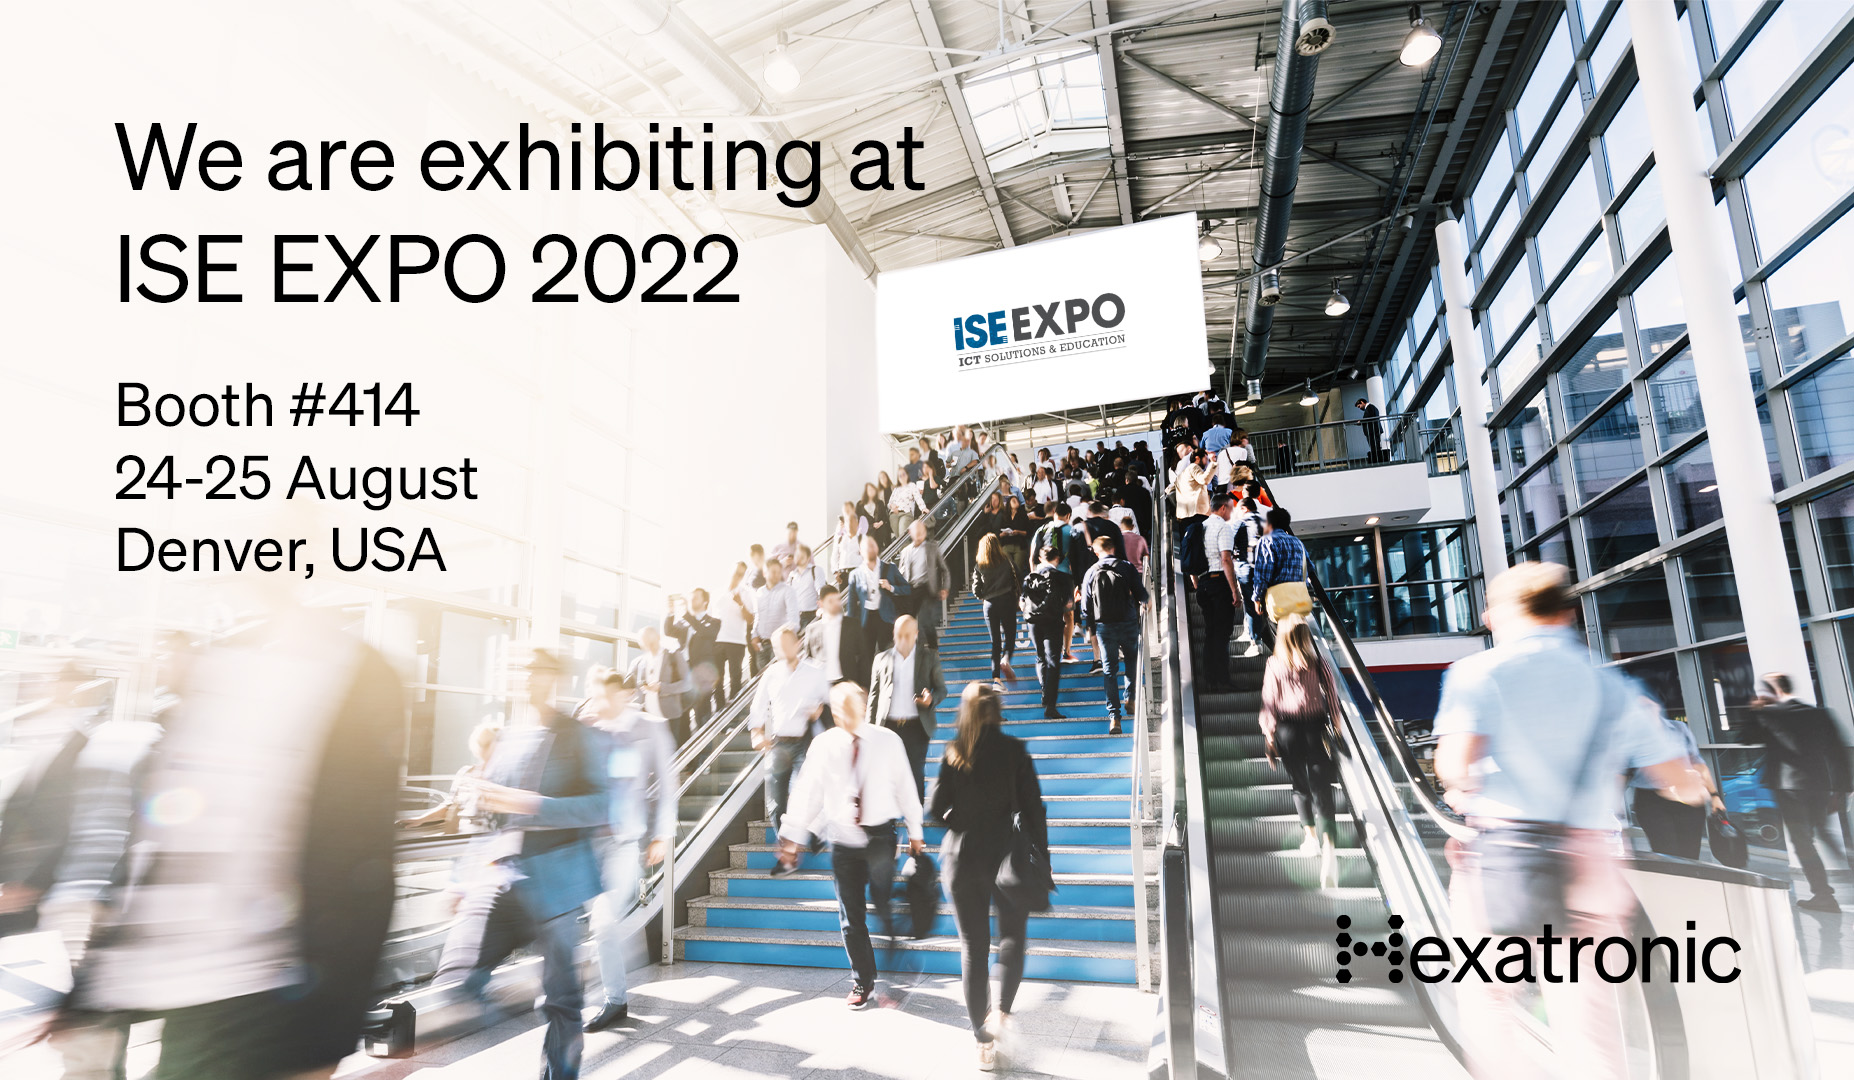 Hexatronic at ISE EXPO 2022